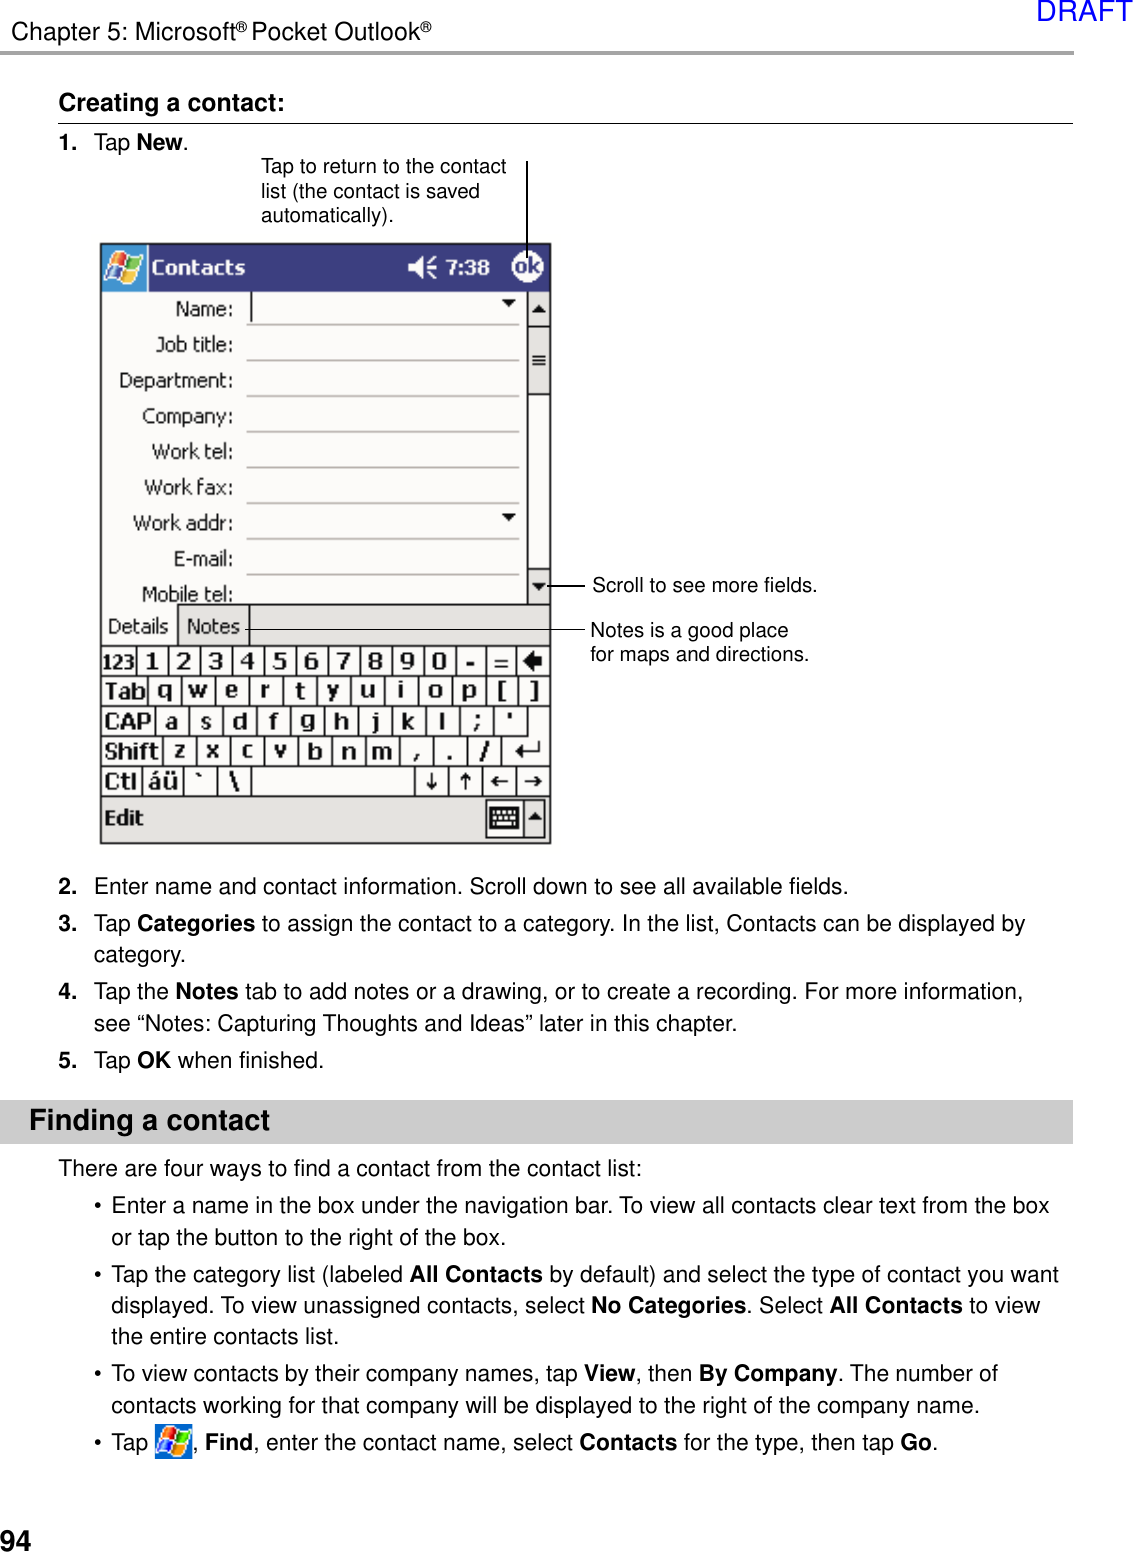 94Chapter 5: Microsoft® Pocket Outlook®Creating a contact:1. Tap New.2. Enter name and contact information. Scroll down to see all available fields.3. Tap Categories to assign the contact to a category. In the list, Contacts can be displayed bycategory.4. Tap the Notes tab to add notes or a drawing, or to create a recording. For more information,see “Notes: Capturing Thoughts and Ideas” later in this chapter.5. Tap OK when finished.Finding a contactThere are four ways to find a contact from the contact list:•Enter a name in the box under the navigation bar. To view all contacts clear text from the boxor tap the button to the right of the box.•Tap the category list (labeled All Contacts by default) and select the type of contact you wantdisplayed. To view unassigned contacts, select No Categories. Select All Contacts to viewthe entire contacts list.•To view contacts by their company names, tap View, then By Company. The number ofcontacts working for that company will be displayed to the right of the company name.•Tap  , Find, enter the contact name, select Contacts for the type, then tap Go.Notes is a good placefor maps and directions.Tap to return to the contactlist (the contact is savedautomatically).Scroll to see more fields.DRAFT